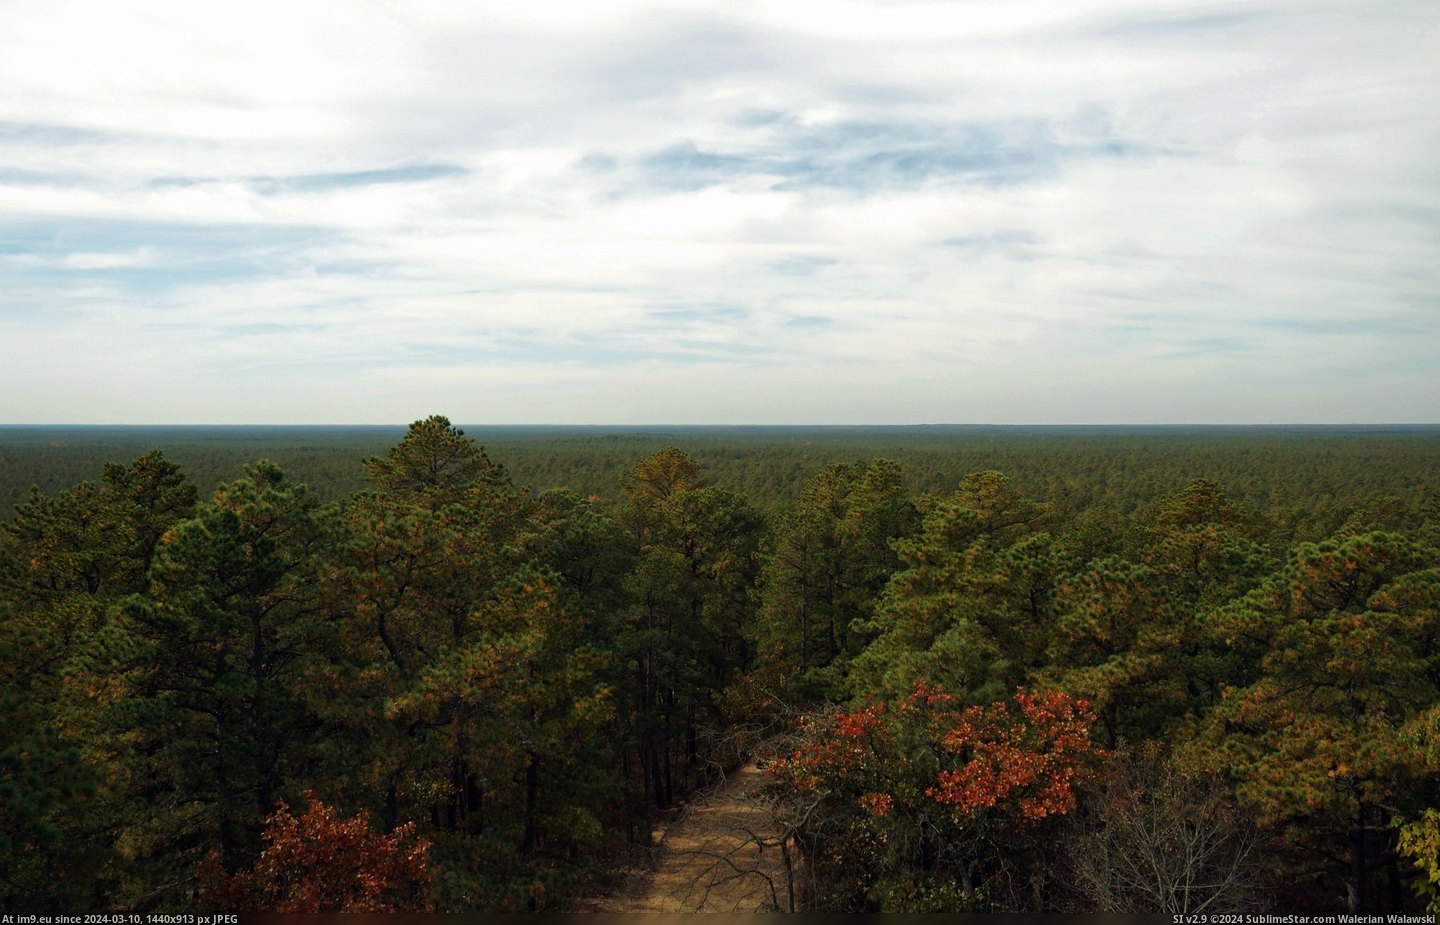 #Fire #Tower #Apple #Pine #Endless #Barrens #Hill #Pie #Jersey [Earthporn] [OC] Endless pine barrens, from the Apple Pie Hill fire tower in New Jersey [2819 x 1800] Pic. (Bild von album My r/EARTHPORN favs))